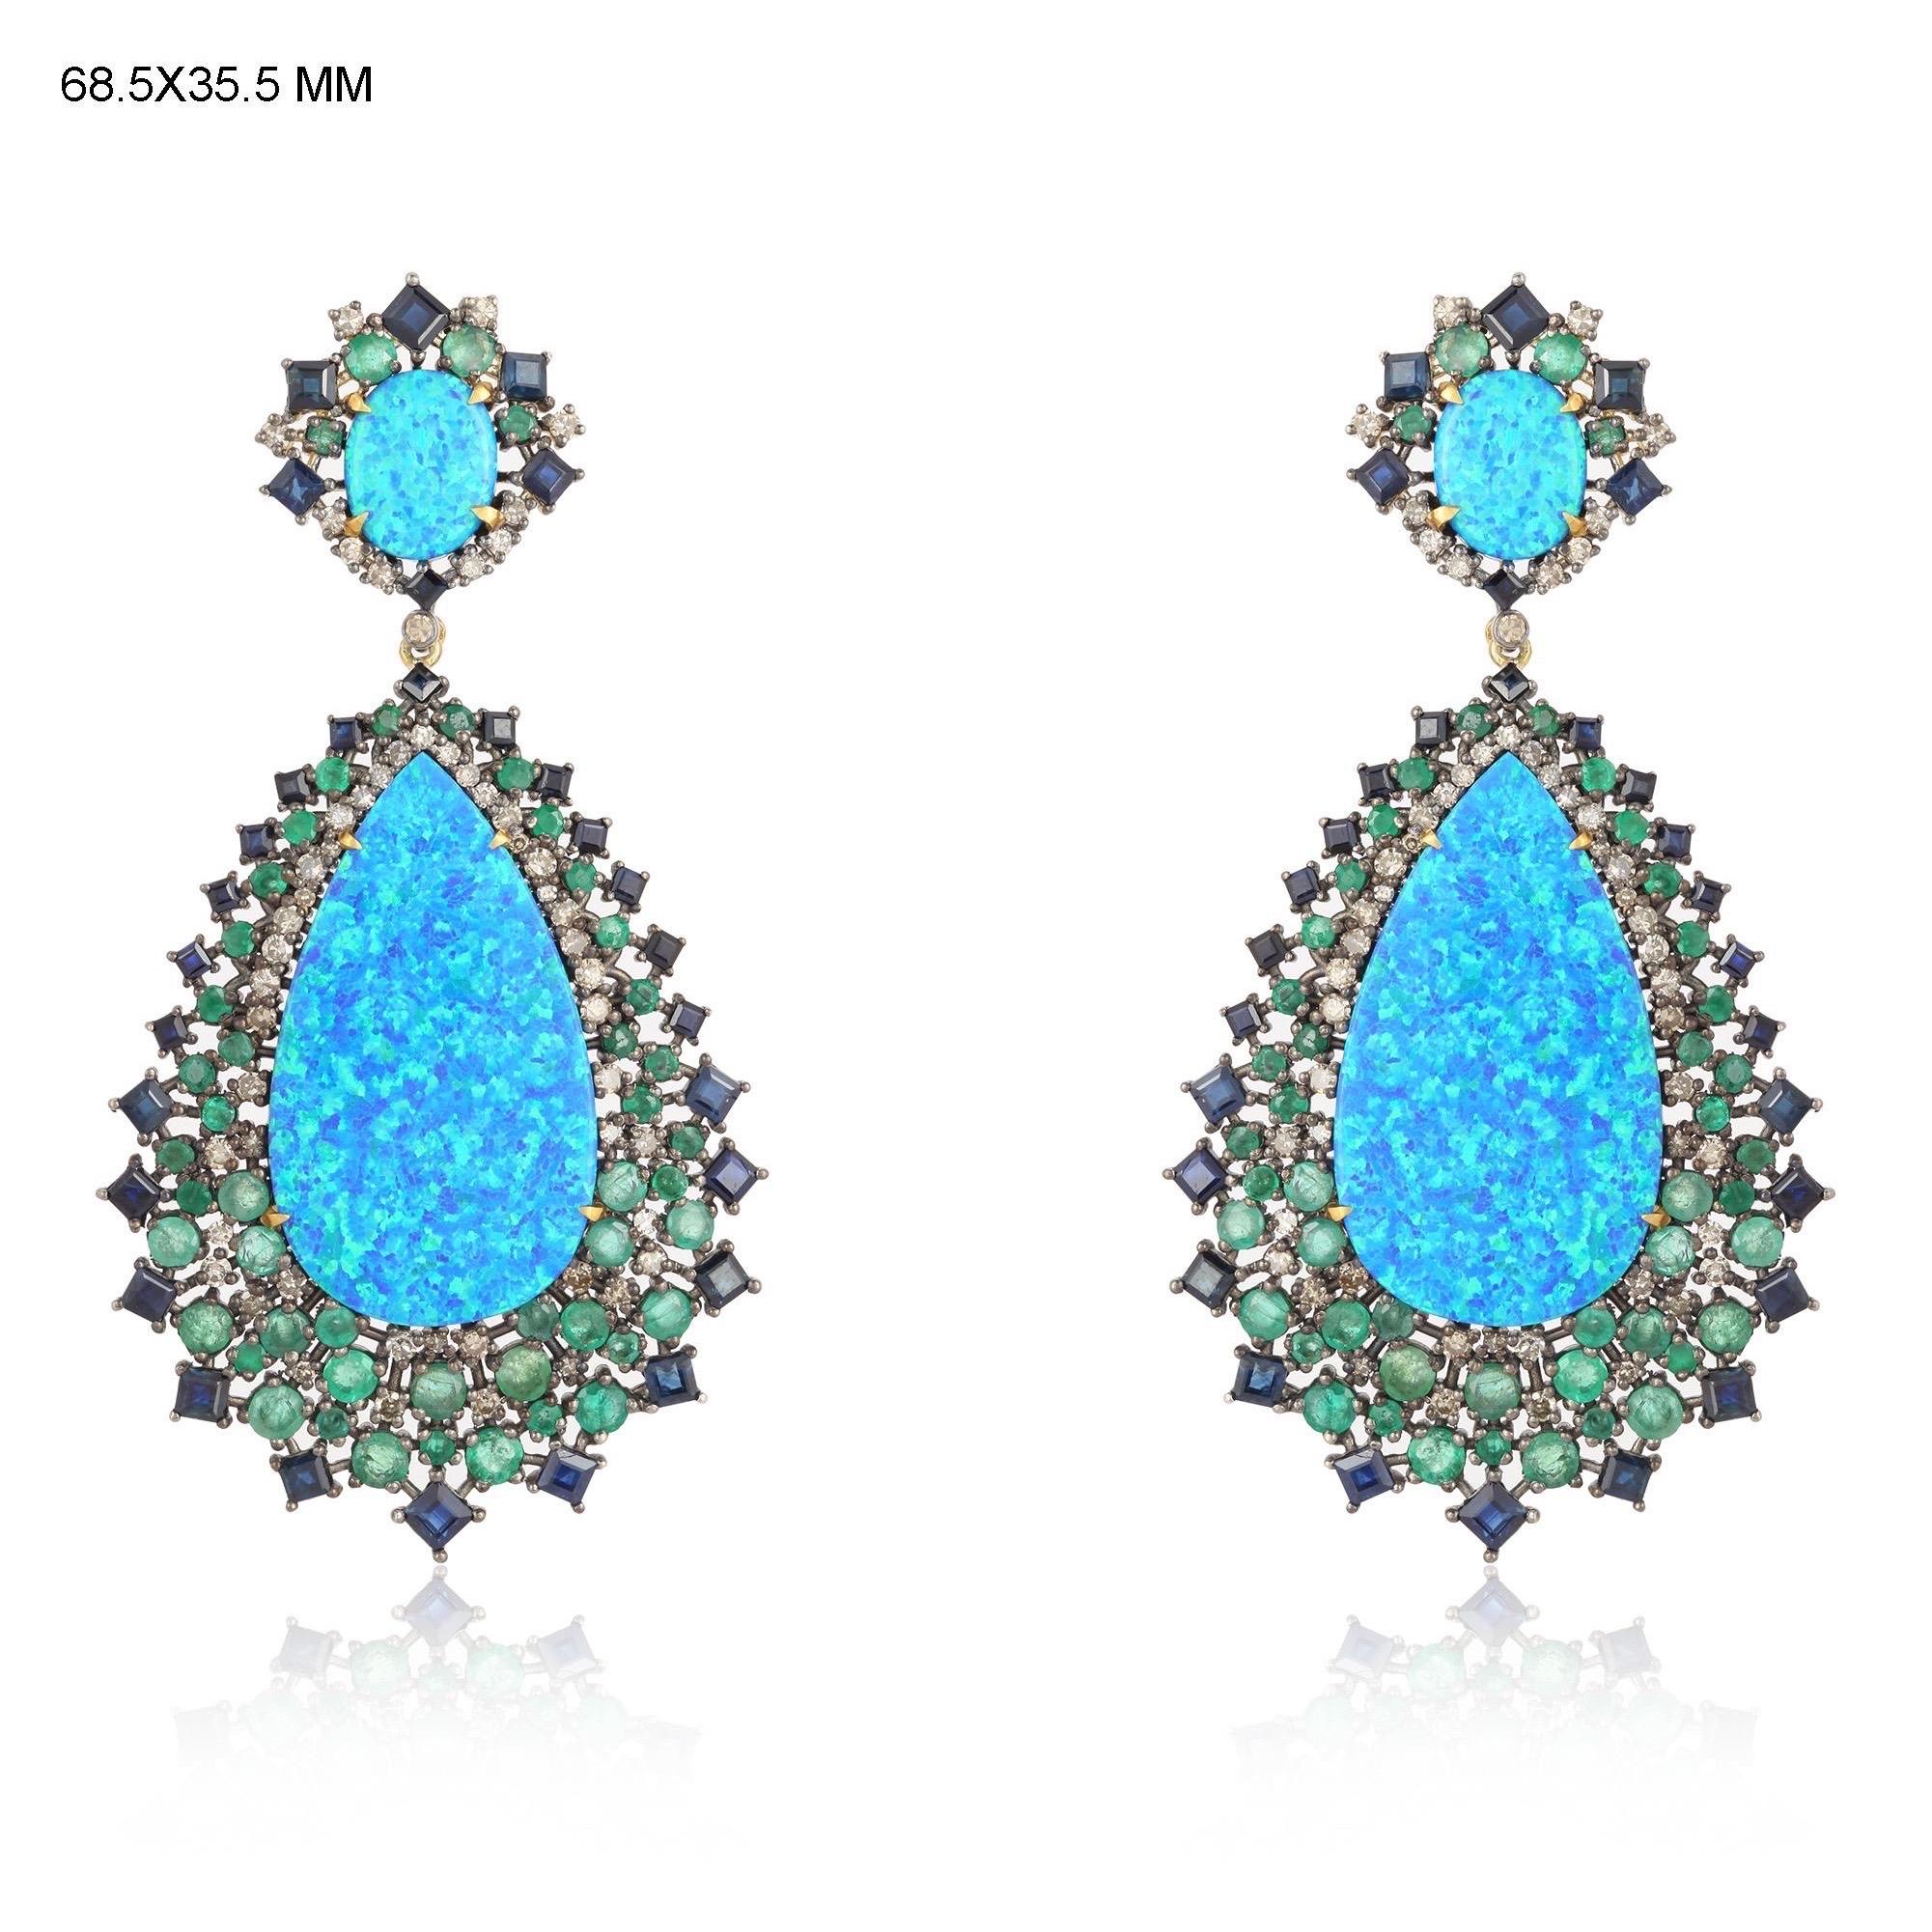 These stunning earrings are crafted in 18-karat gold and sterling silver. It is hand set in 11.2 carats opal doublets, 6.02 carats emerald, 5.37 carats blue sapphire and 1.65 carats of diamonds. See other opal pieces that compliments with these